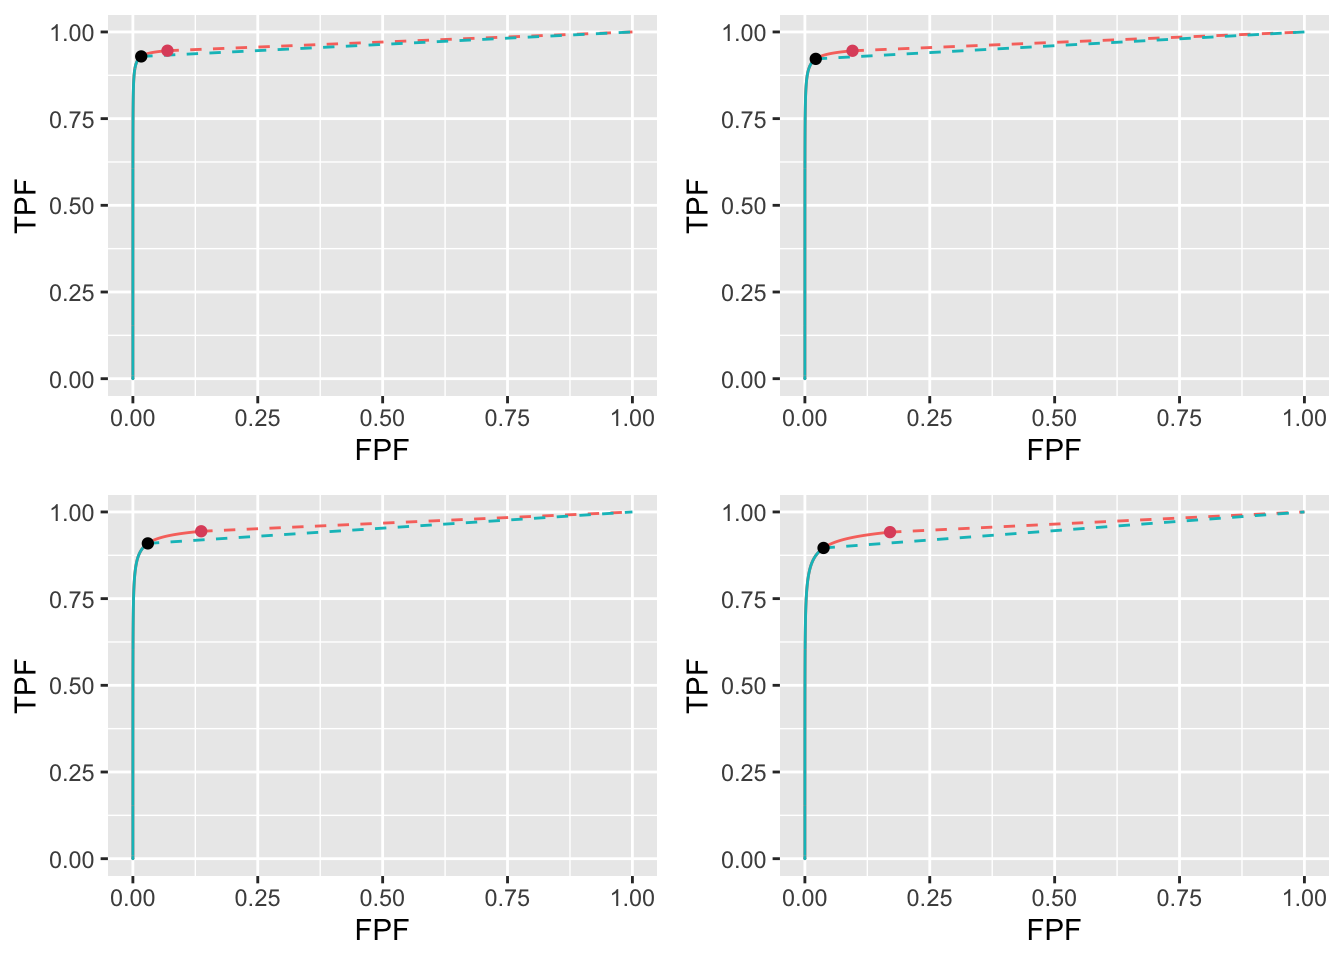 High performance varying $\lambda$ ROC plots for the two optimization methods with superimposed operating points. The color coding is as in previous figures. The values of $\lambda$ are: top-left $\lambda = 1$, top-right $\lambda = 2$, bottom-left $\lambda = 5$ and bottom-right $\lambda = 10$.